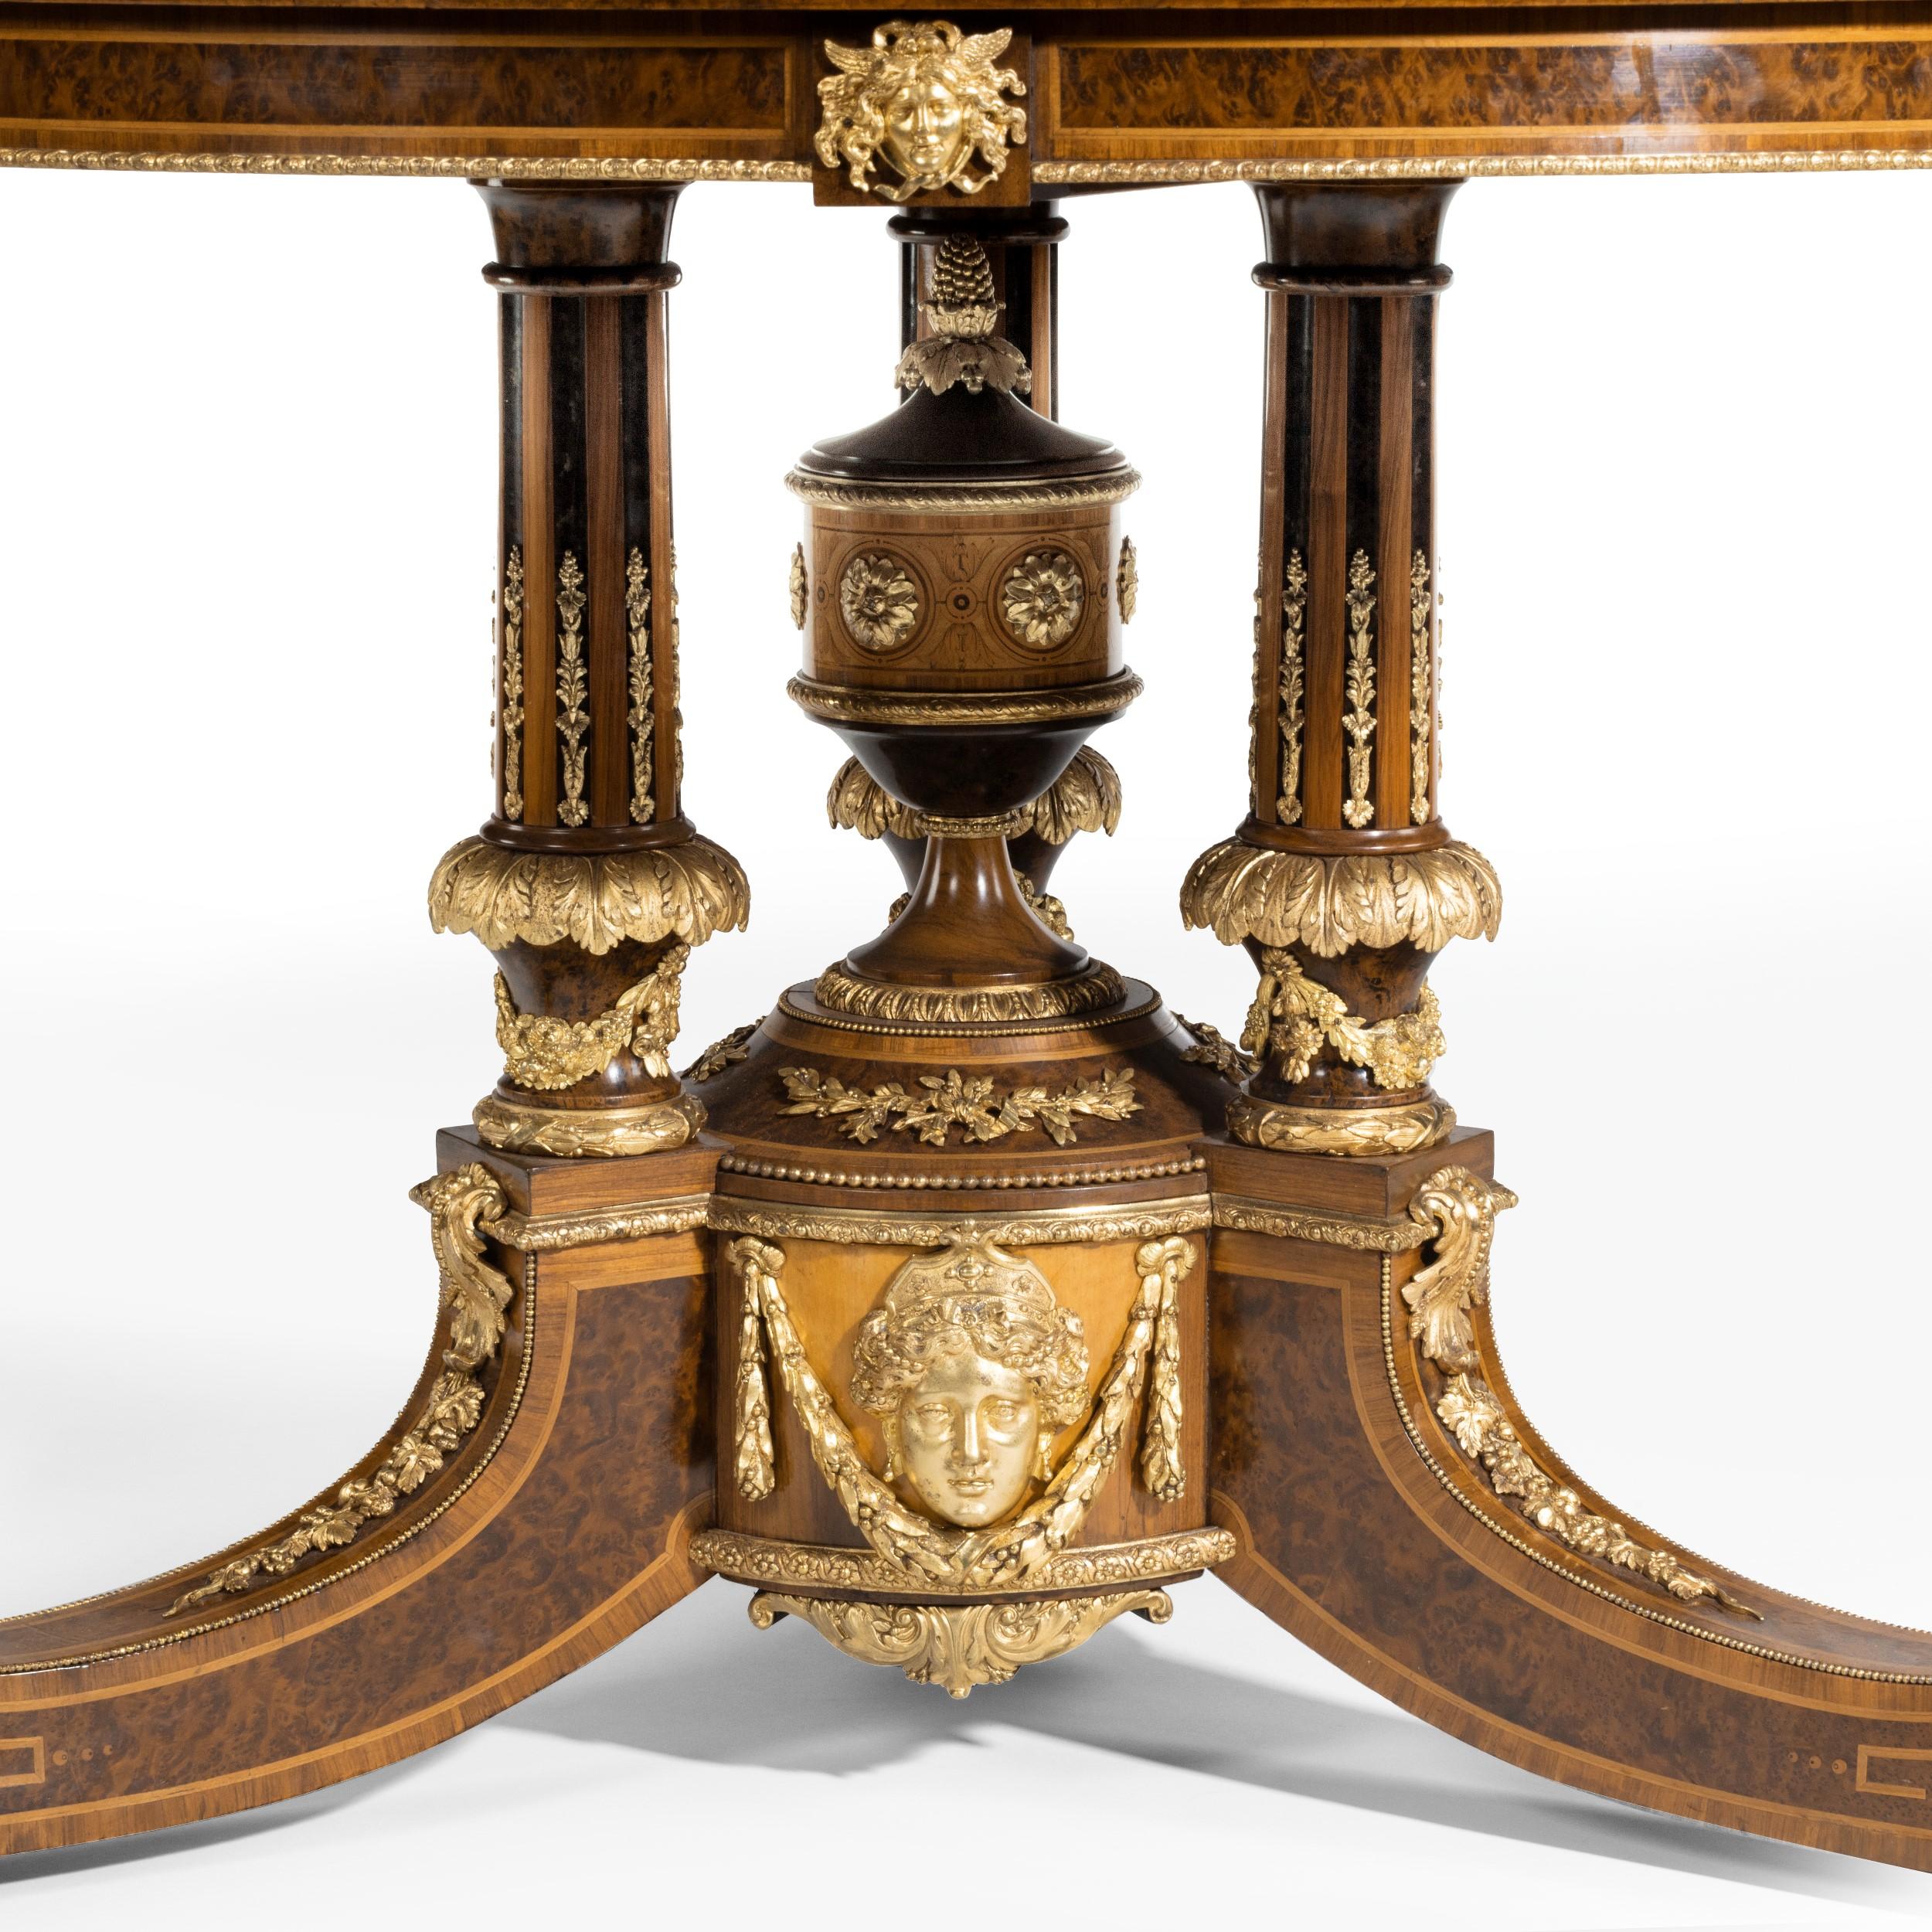 Gilt Exceptional 19th Century Centre Table with Thuya Wood Top by Holland & Sons